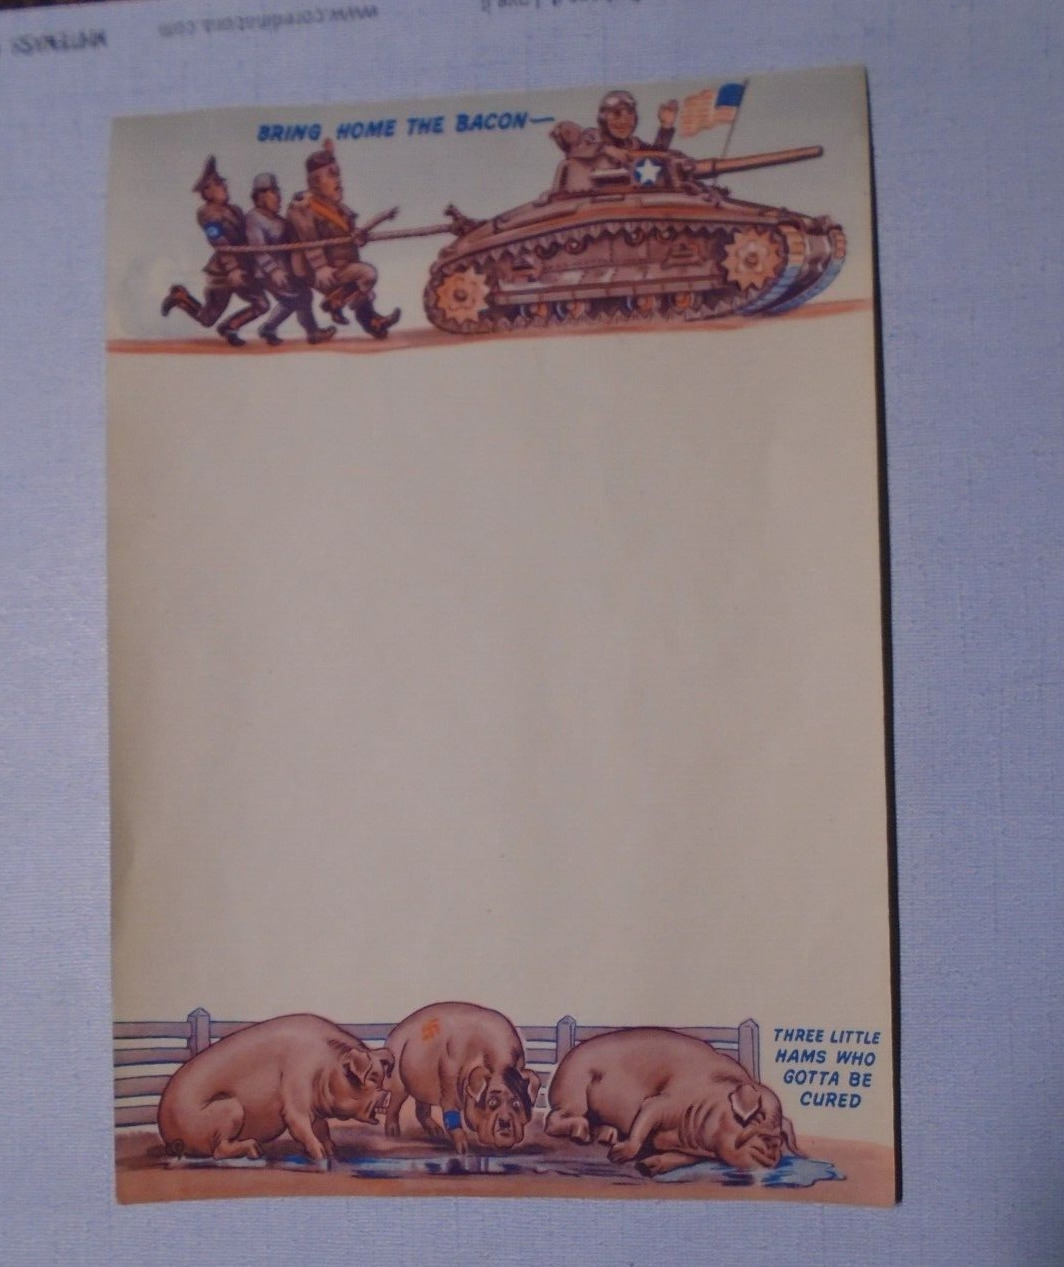 WWII anti-Axis letterhead, Bring Home the Bacon